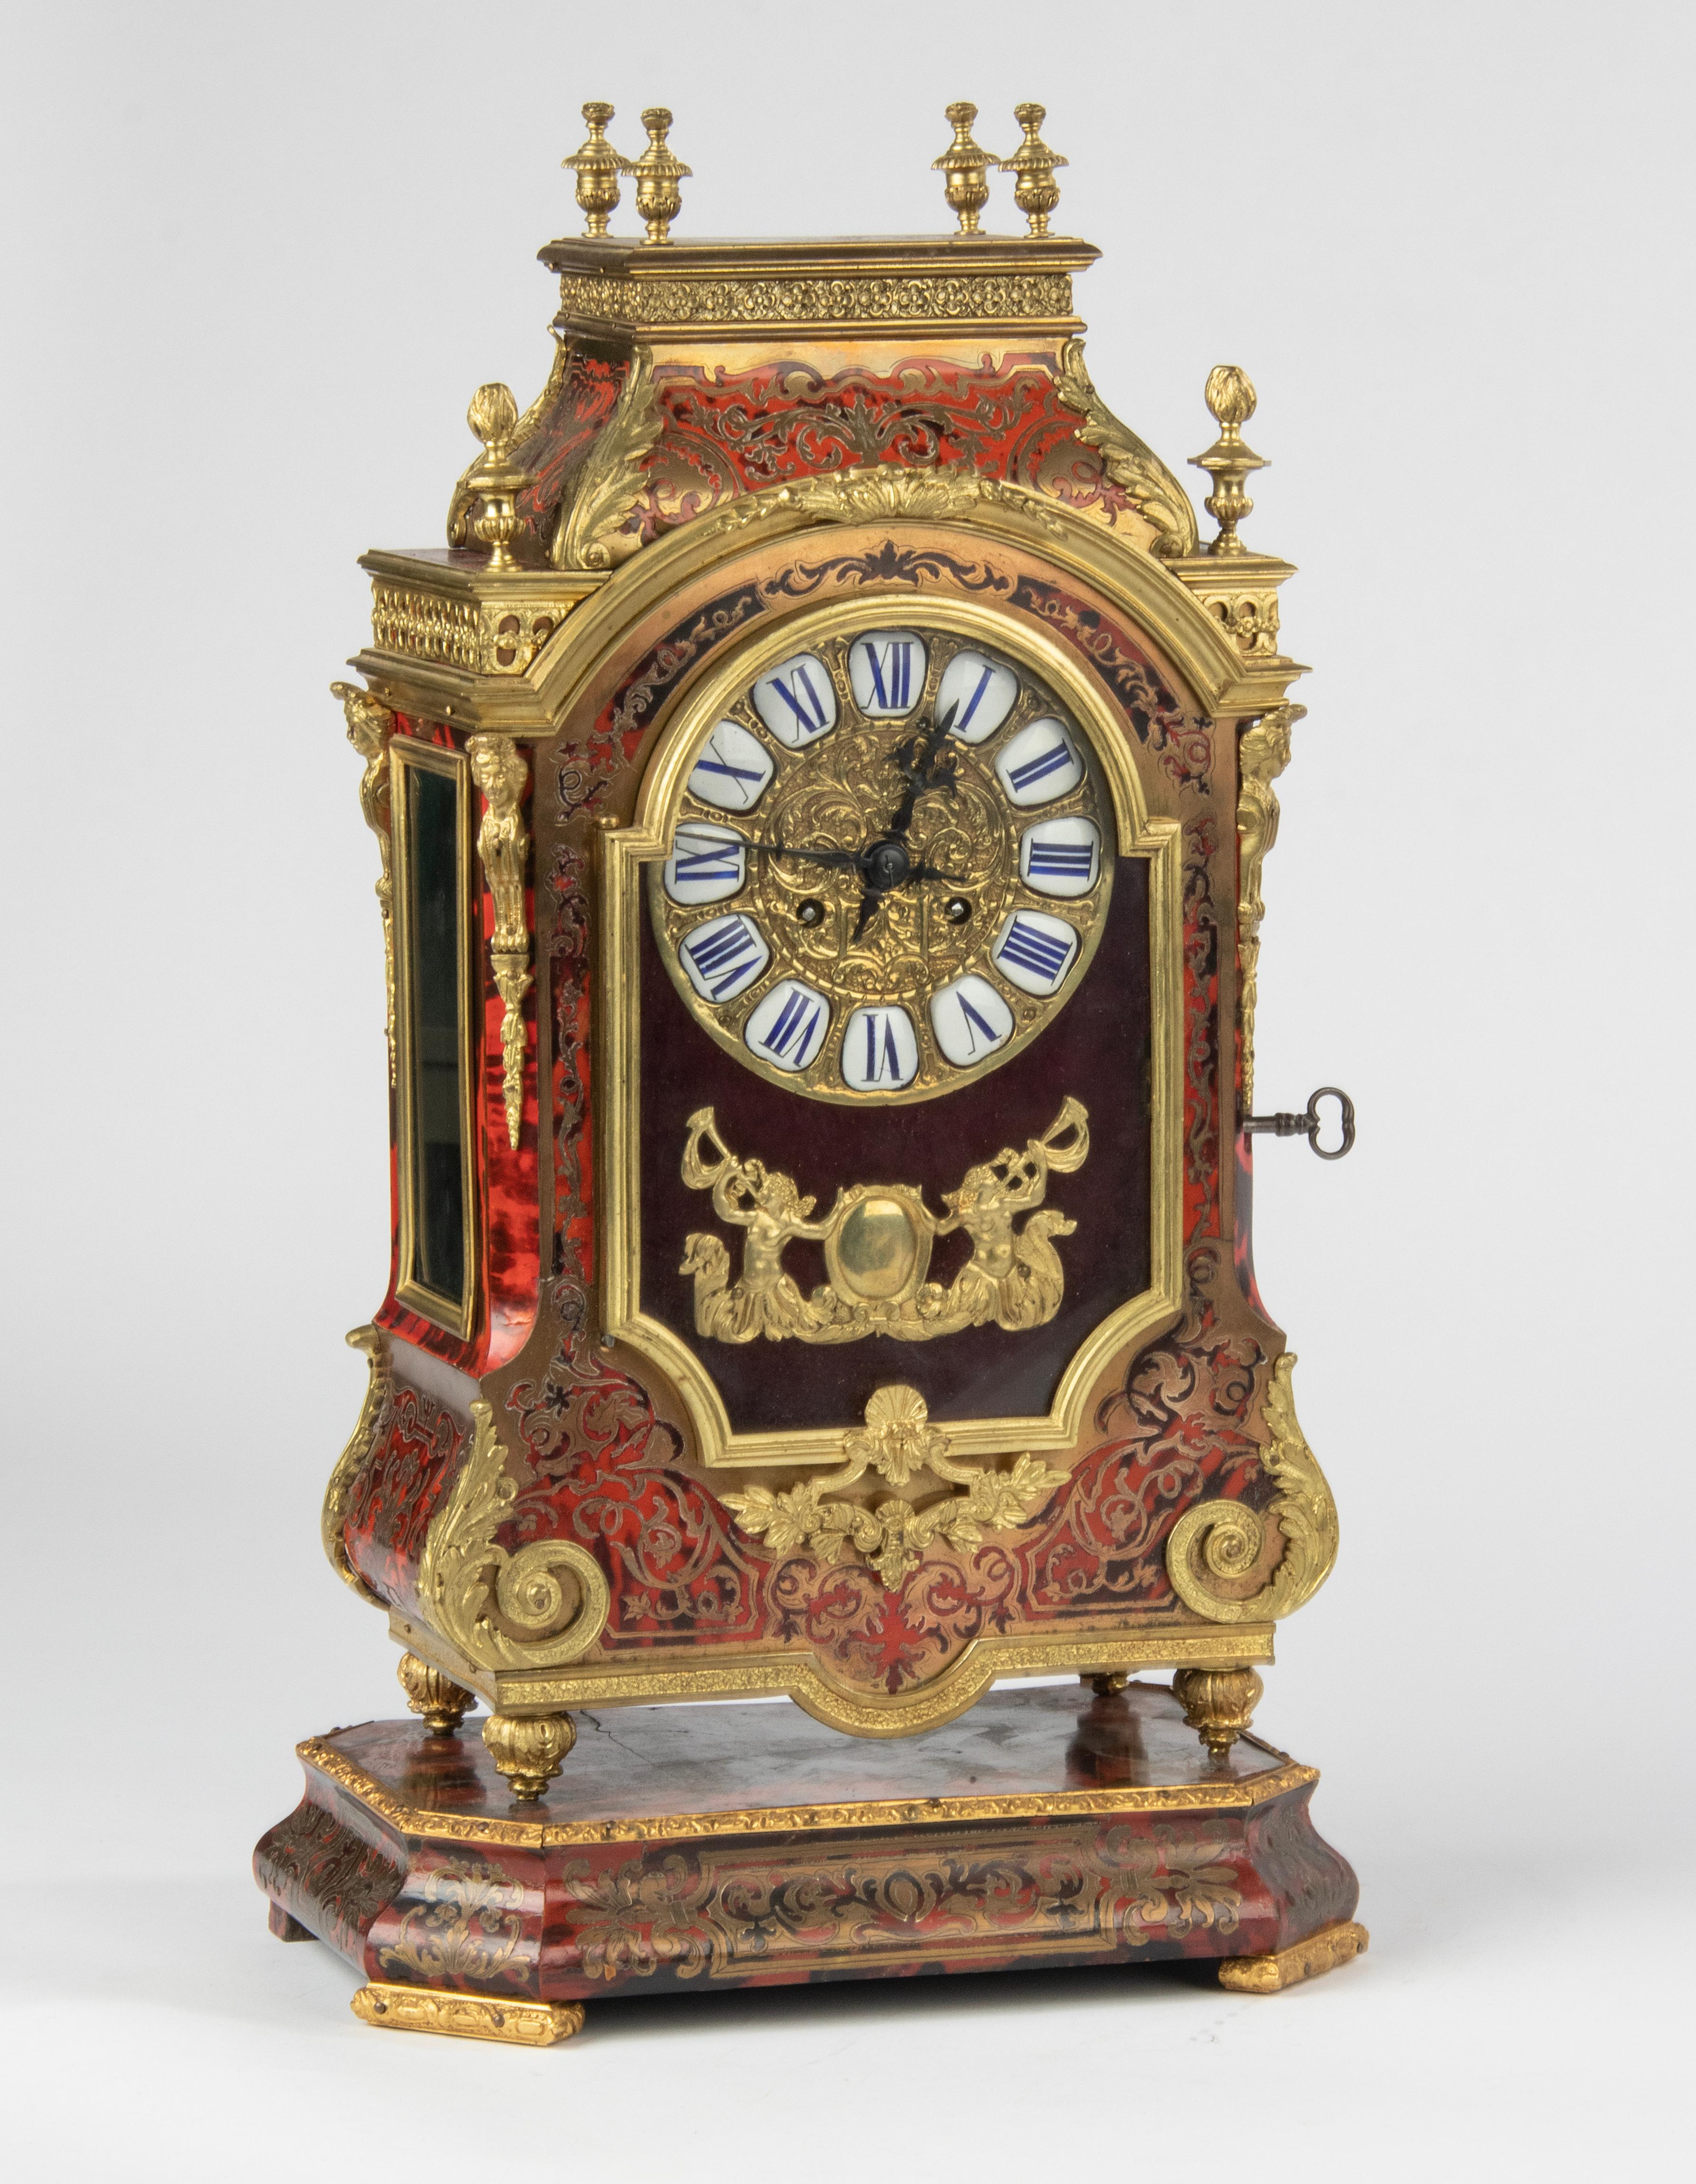 A fine quality French Napoleon III mantle clock in the style of André-Charles Boulle, with a matching console. This model also called 